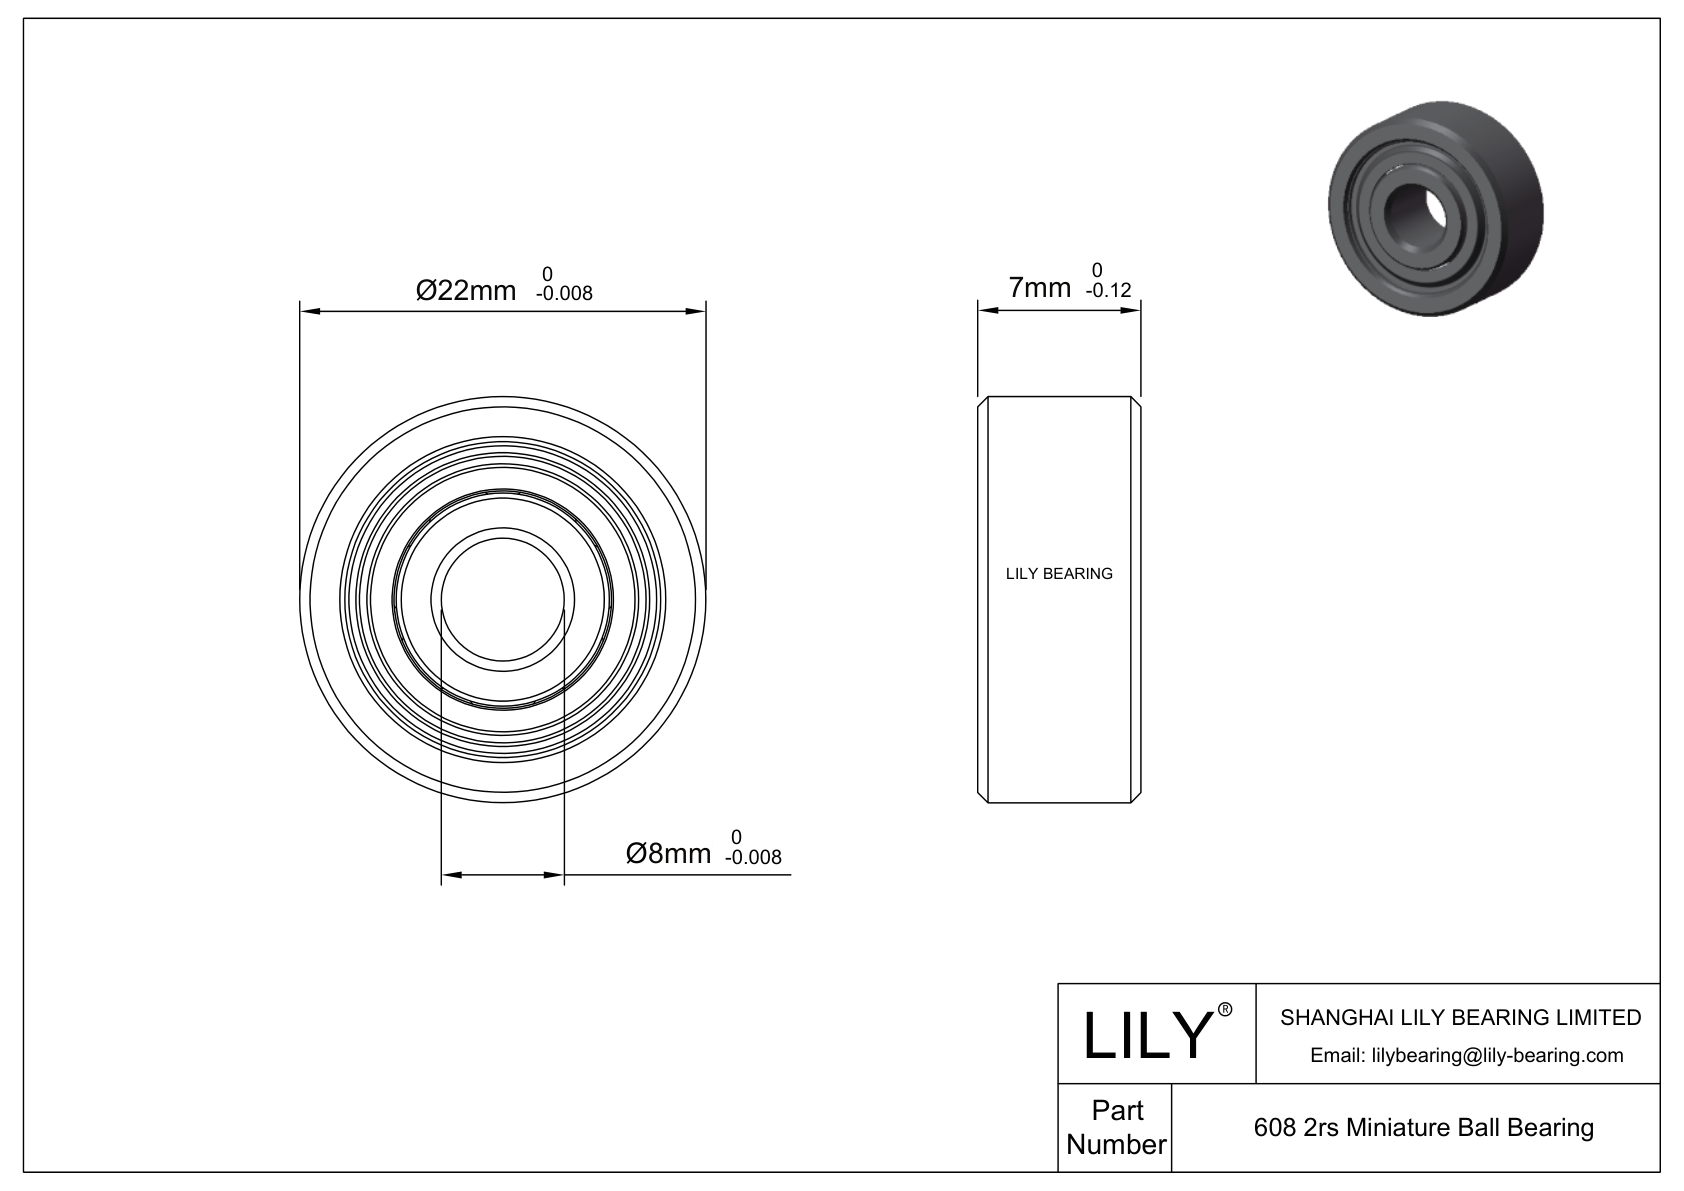 LILY-BS60828-10 POM Coated Bearing cad drawing